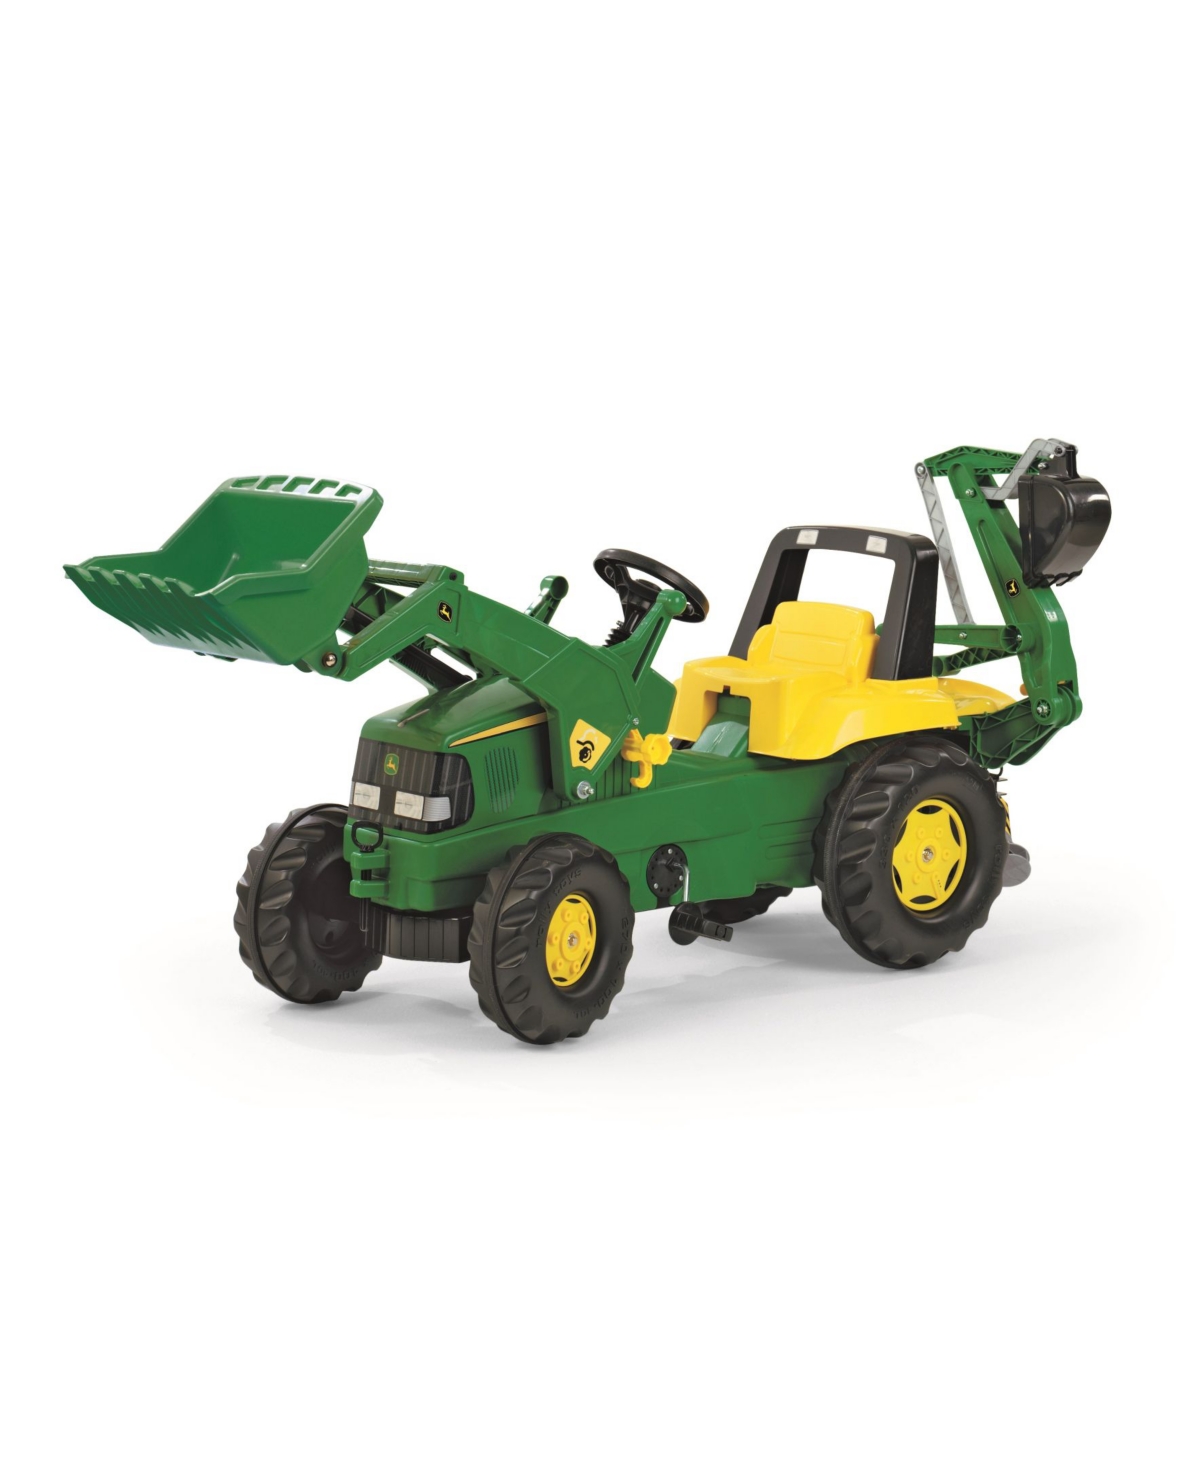 Rolly Toys John Deere Kid Backhoe Pedal Tractor With Front Loader In Green